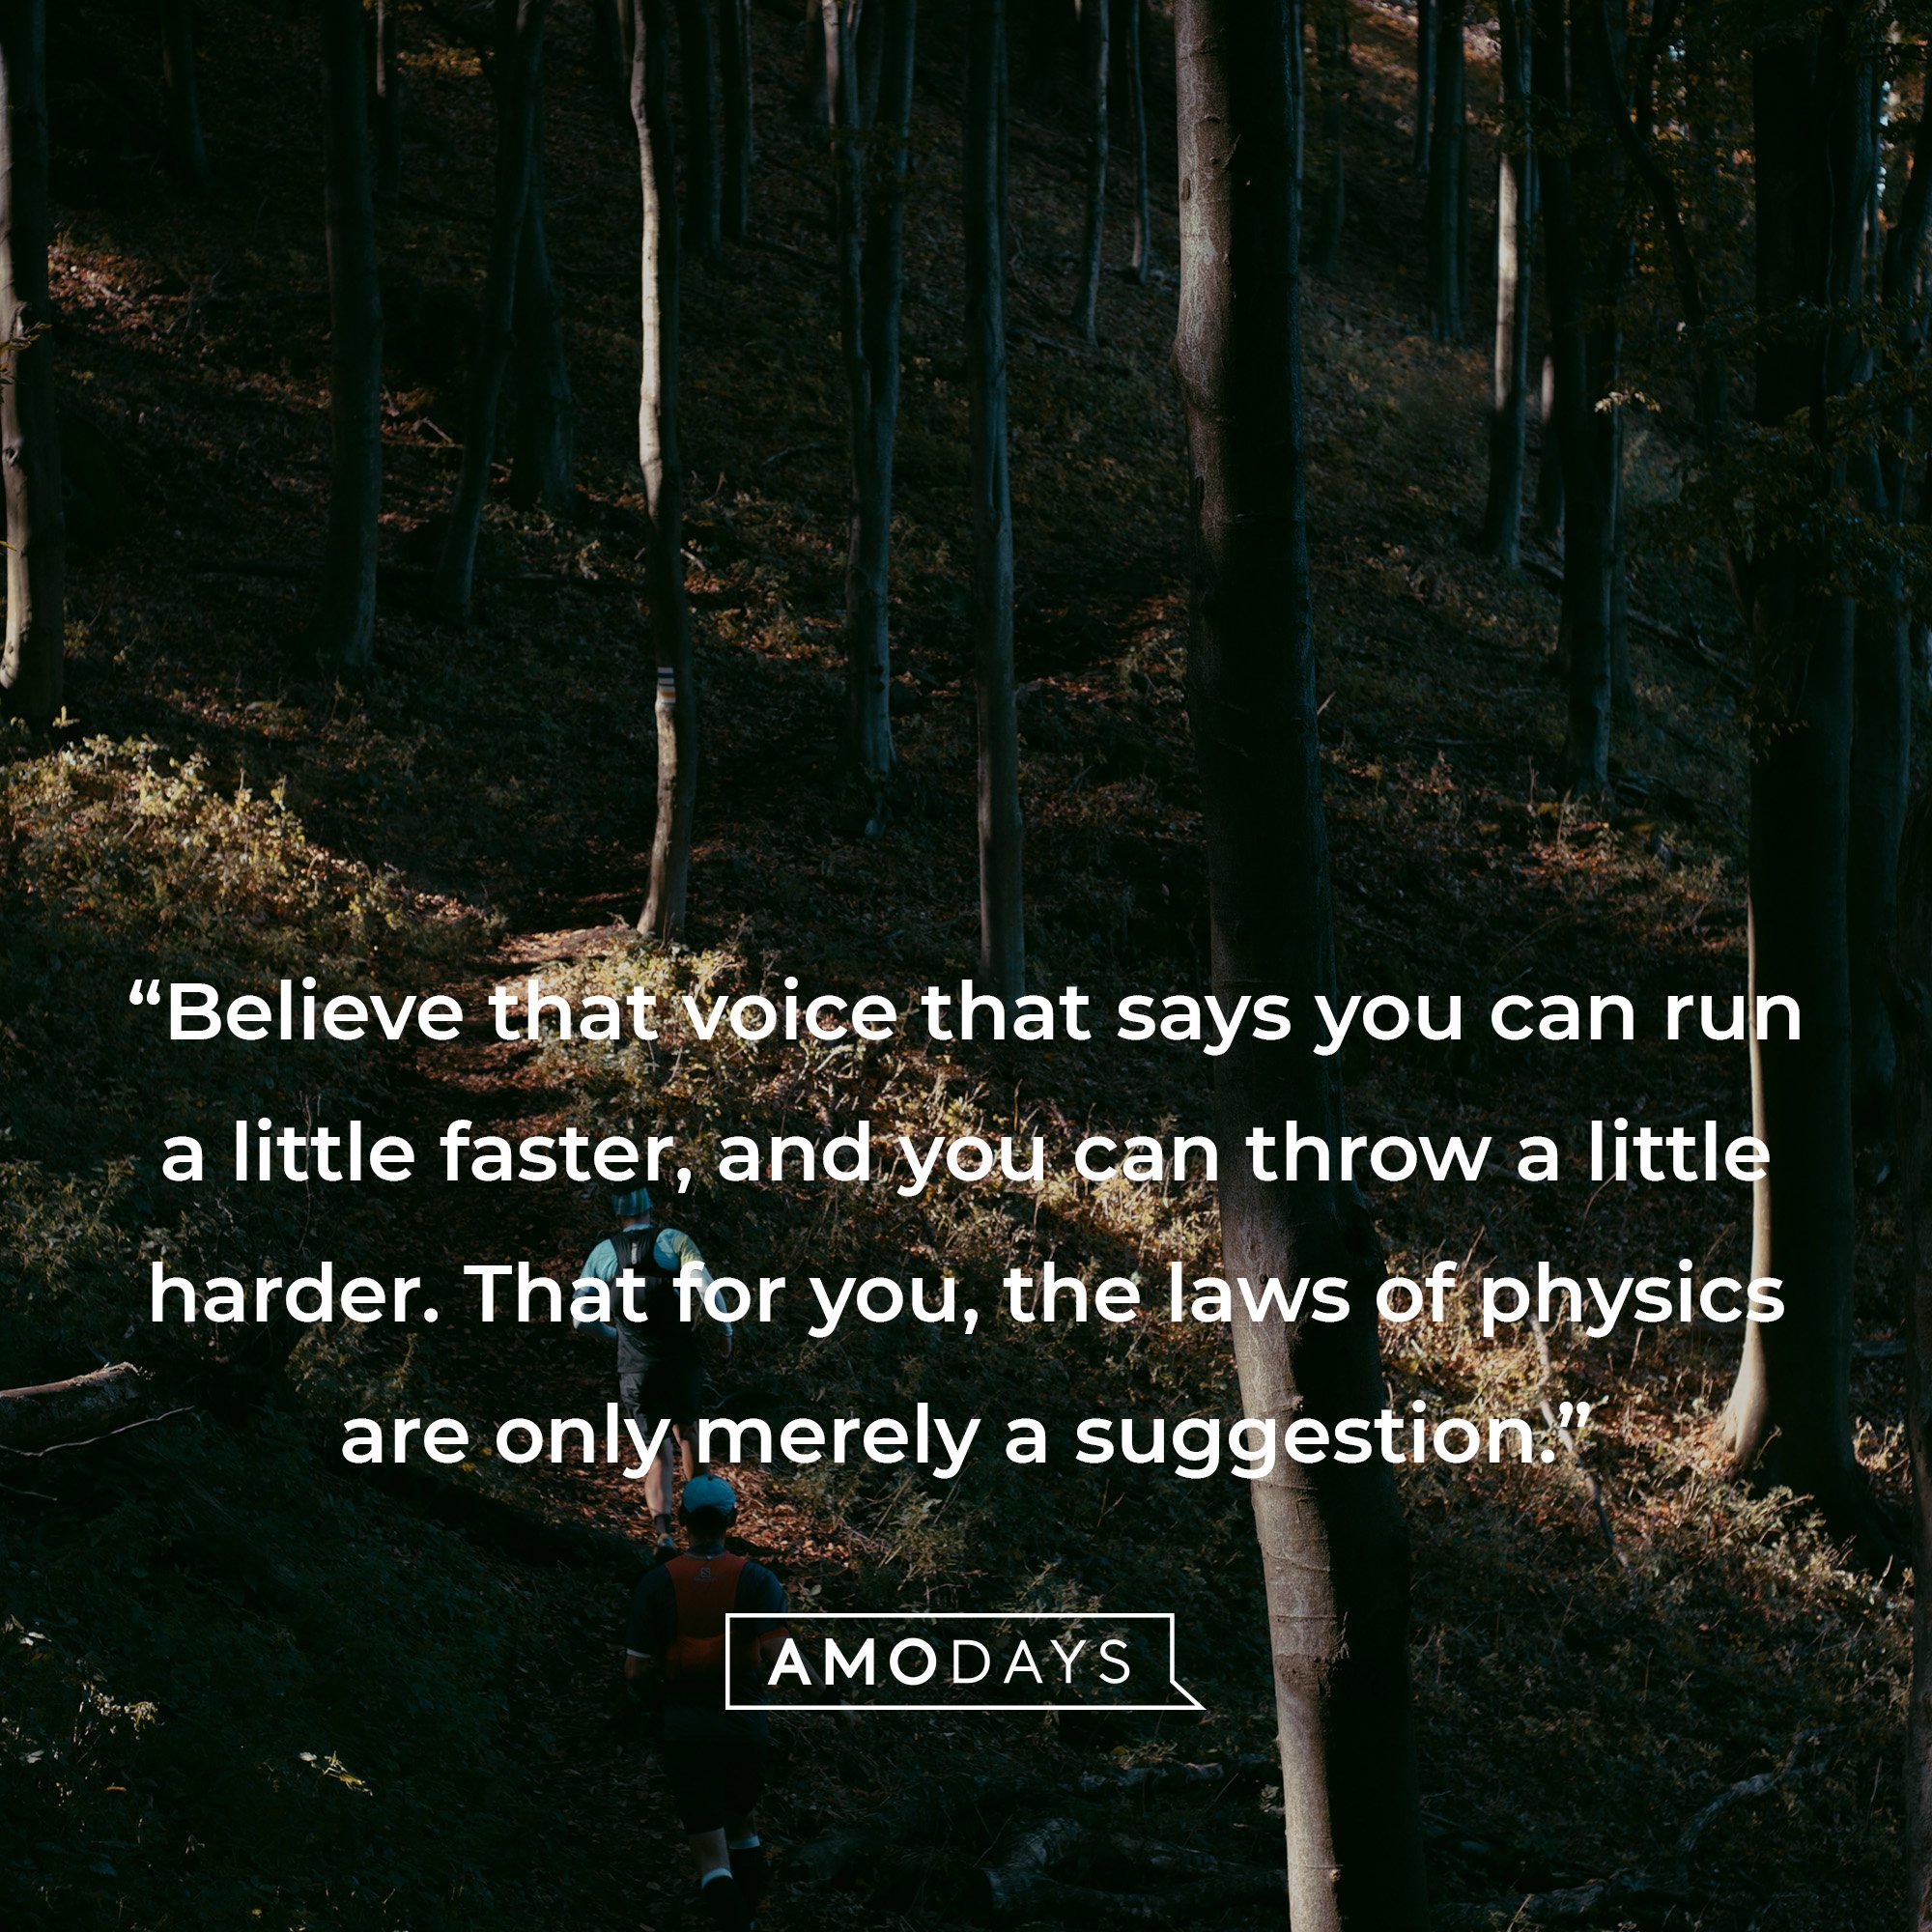 Nike’s quote: “Believe that voice that says you can run a little faster, and you can throw a little harder. That for you, the laws of physics are only merely a suggestion.” | Source: AmoDays